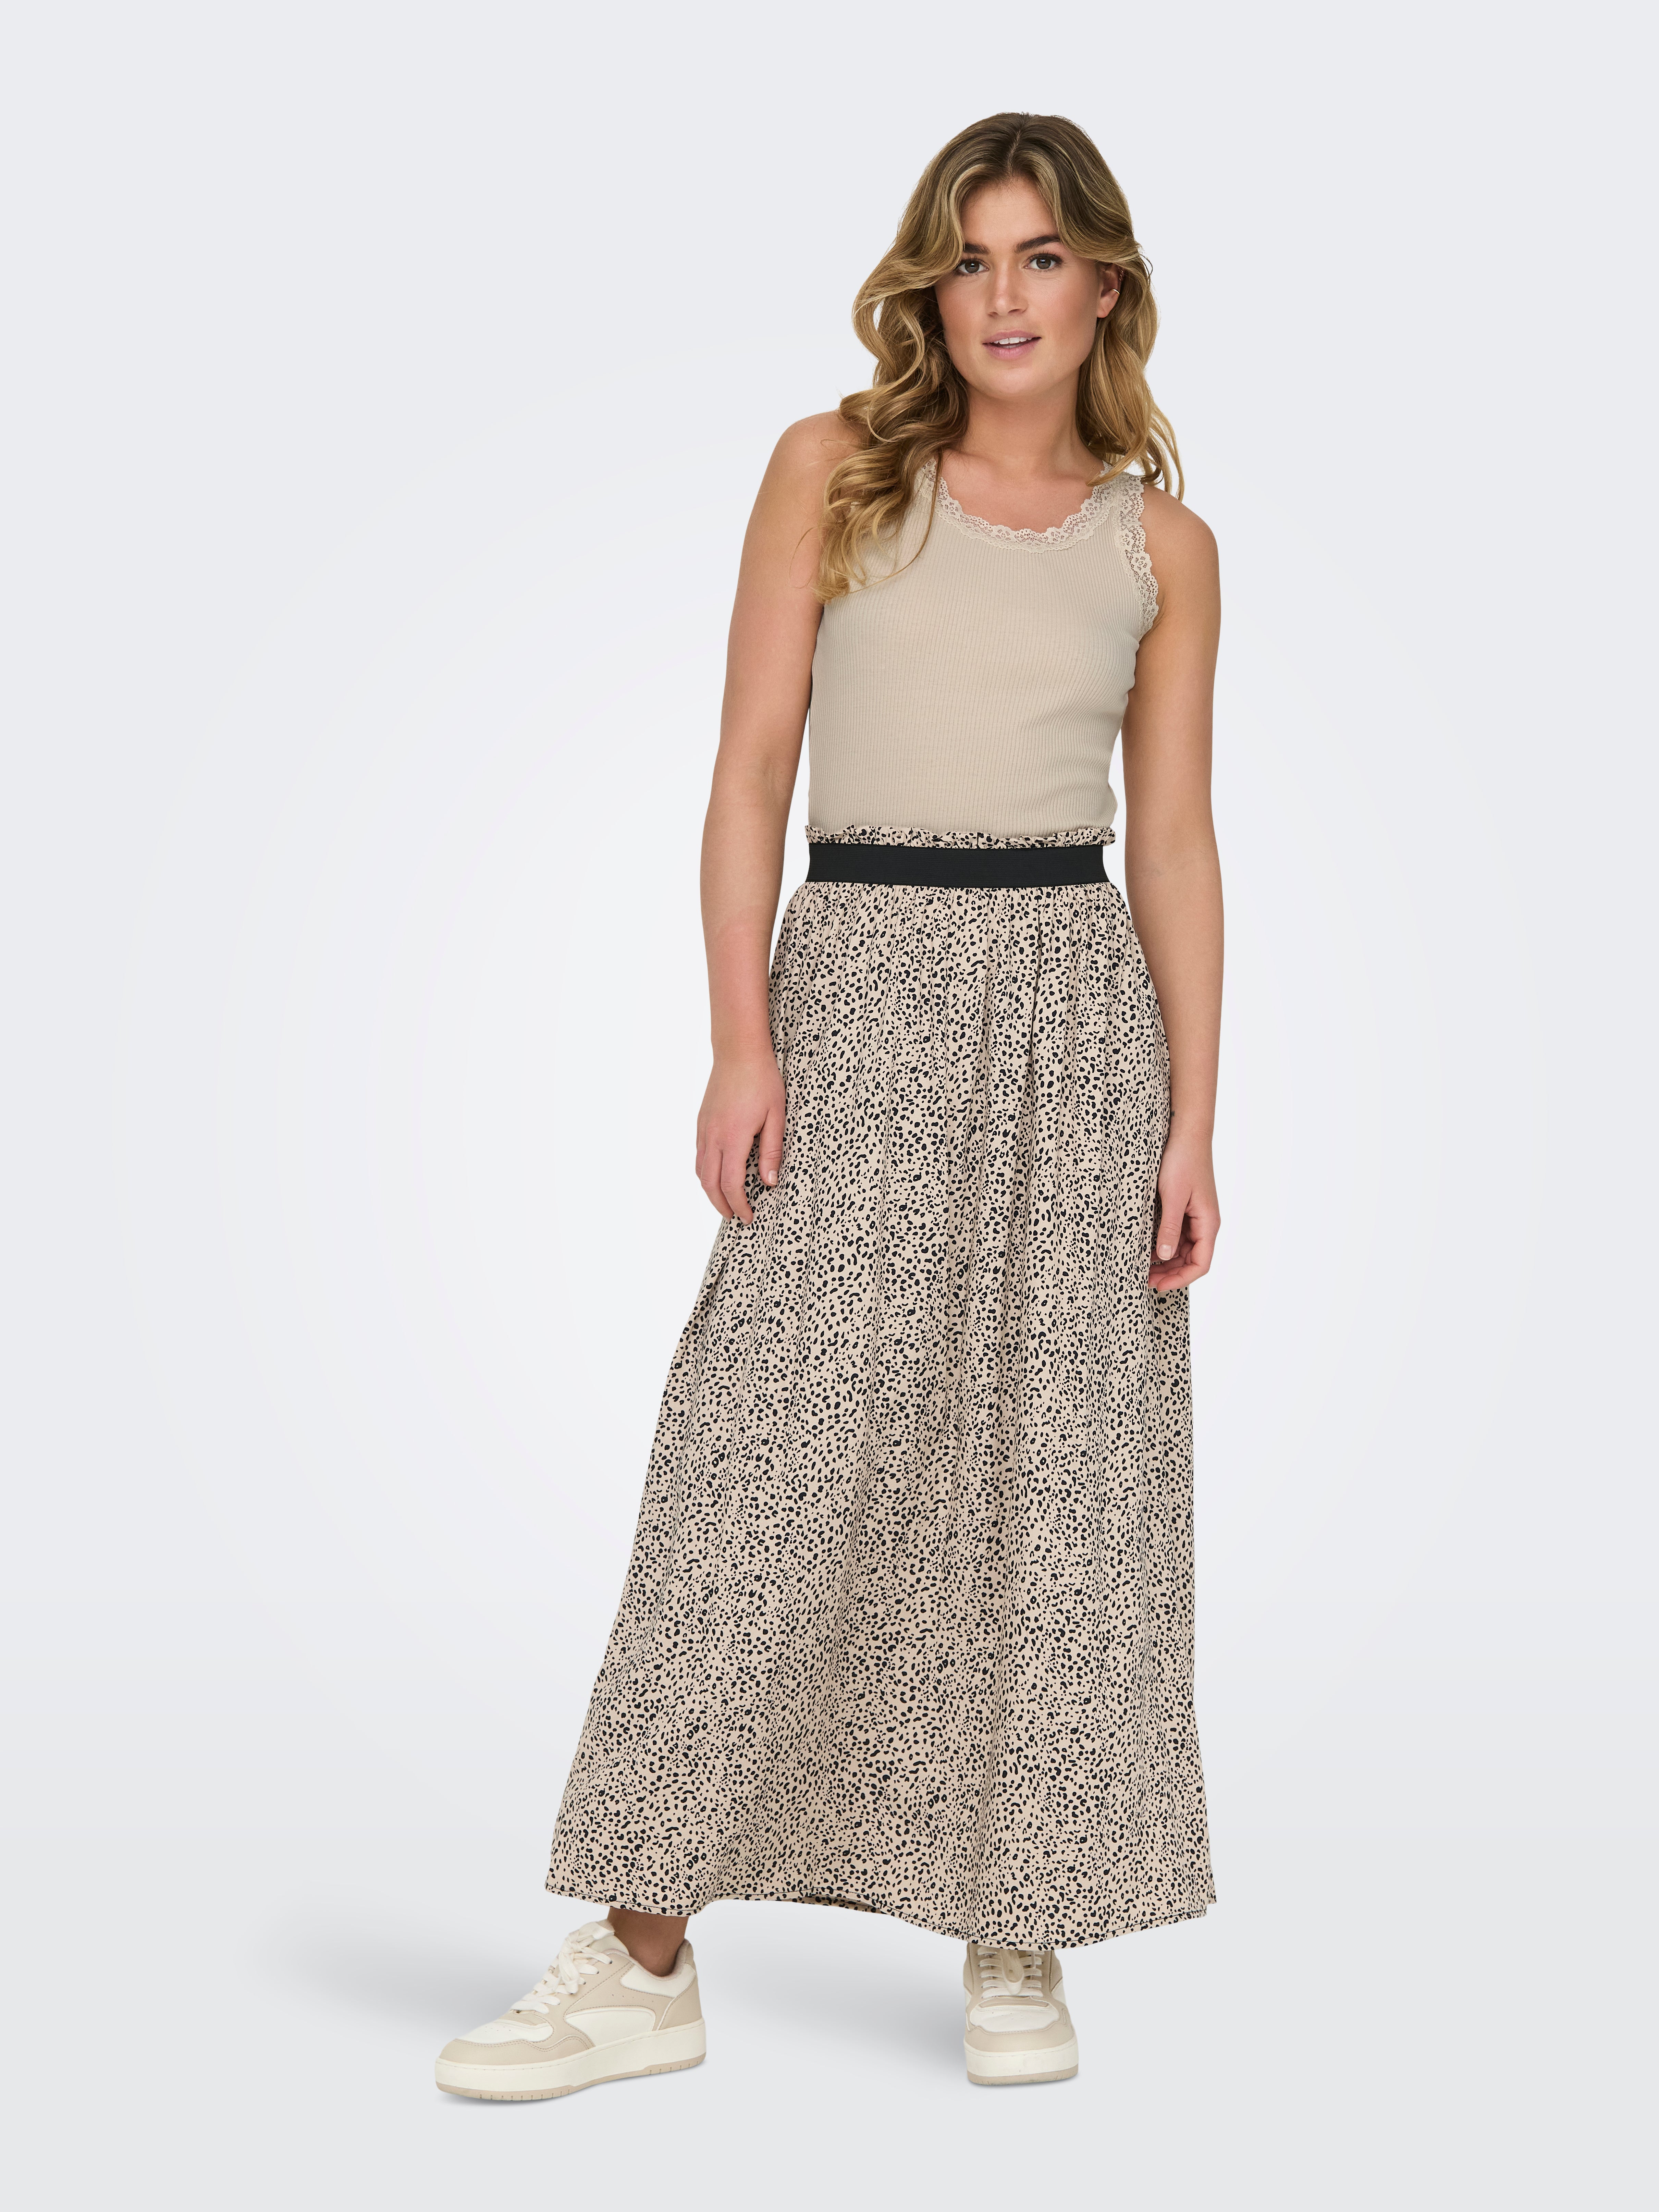 Patterned Maxi skirt